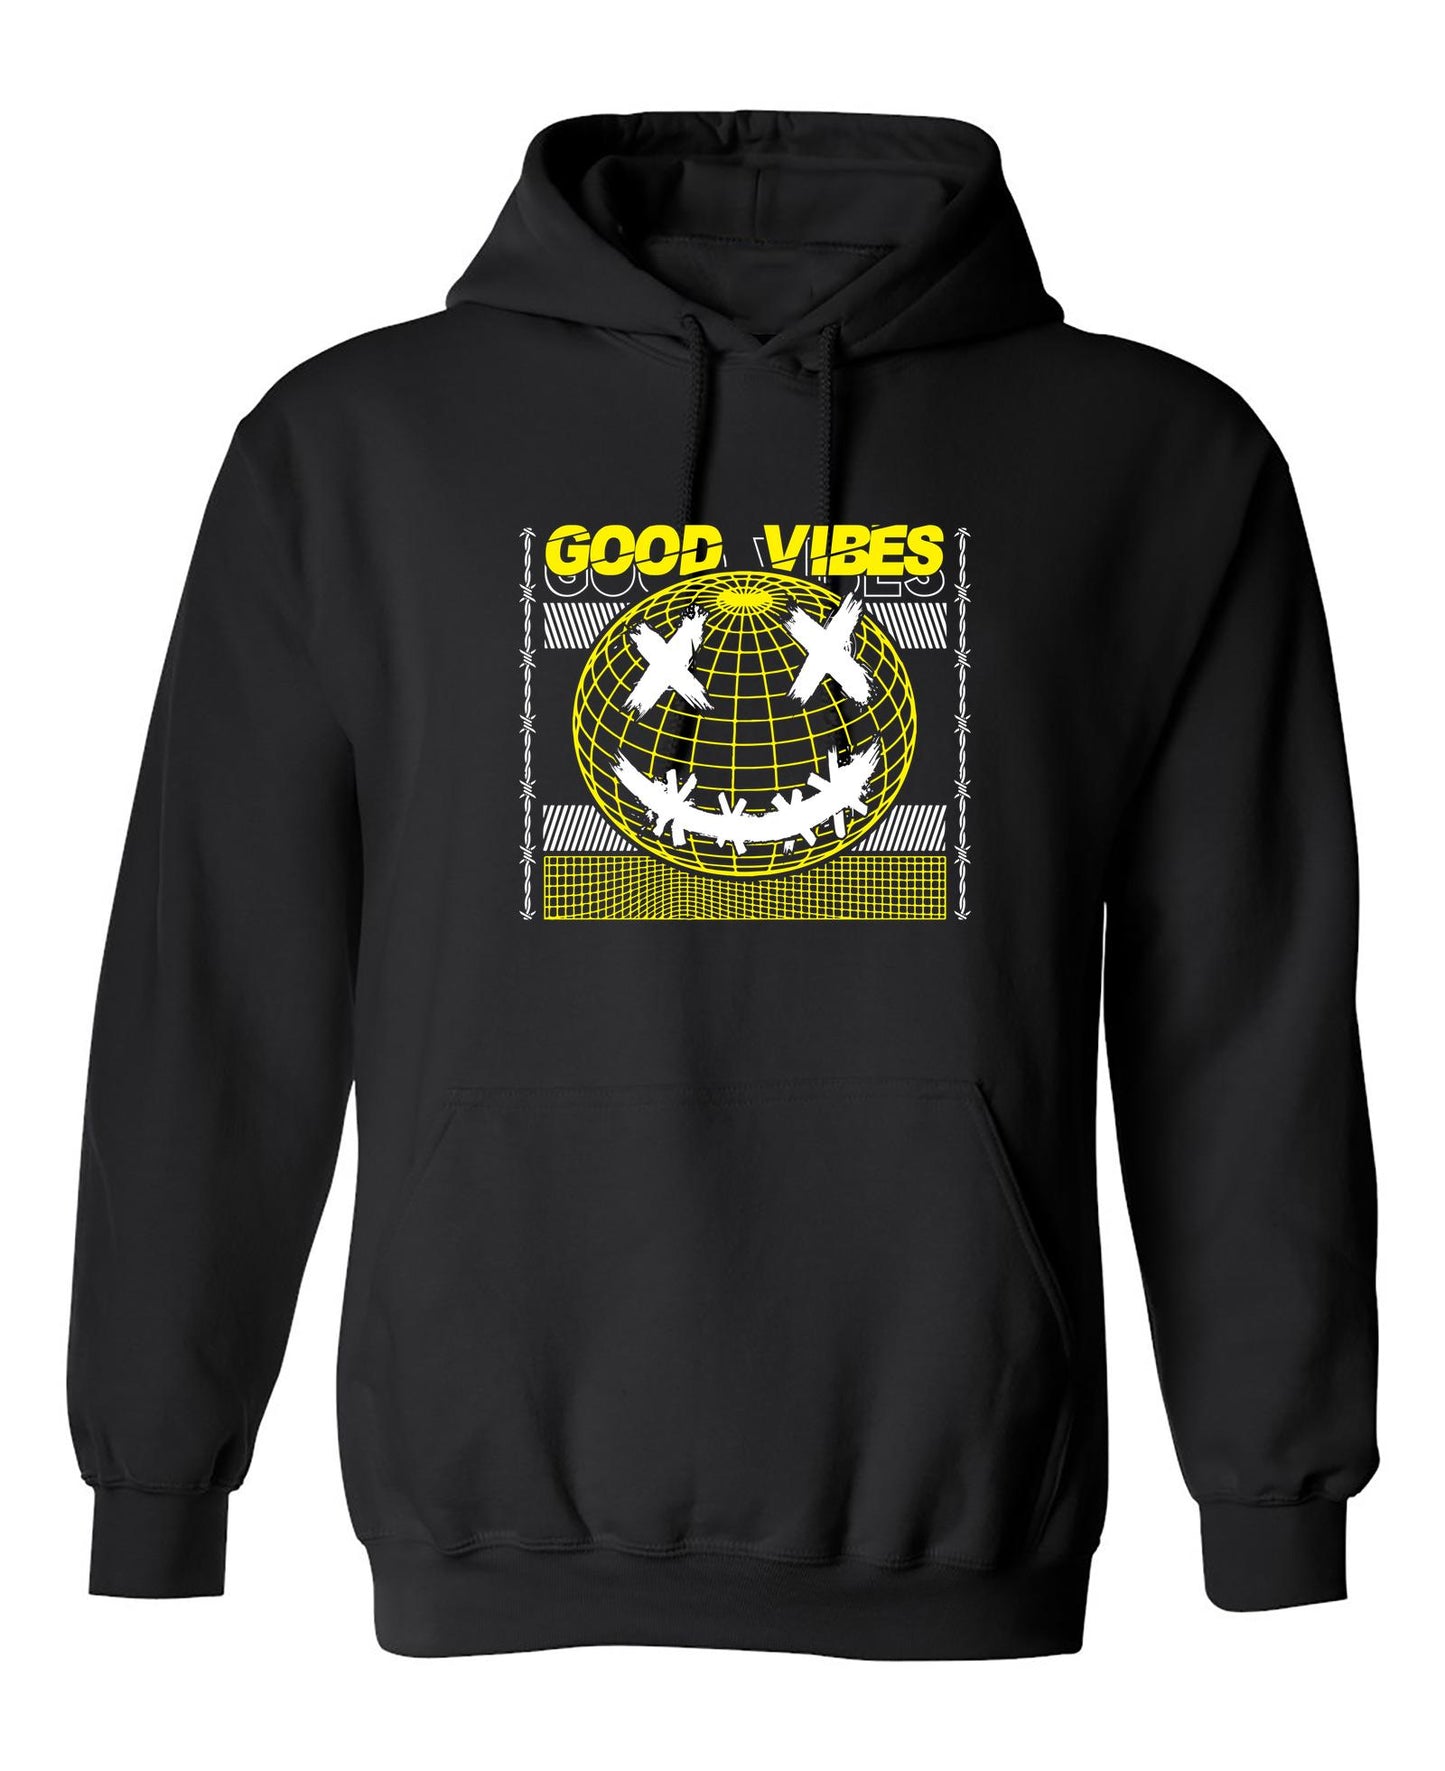 Funny T-Shirts design "PS_1247_SMILE_GOOD_VIBES"